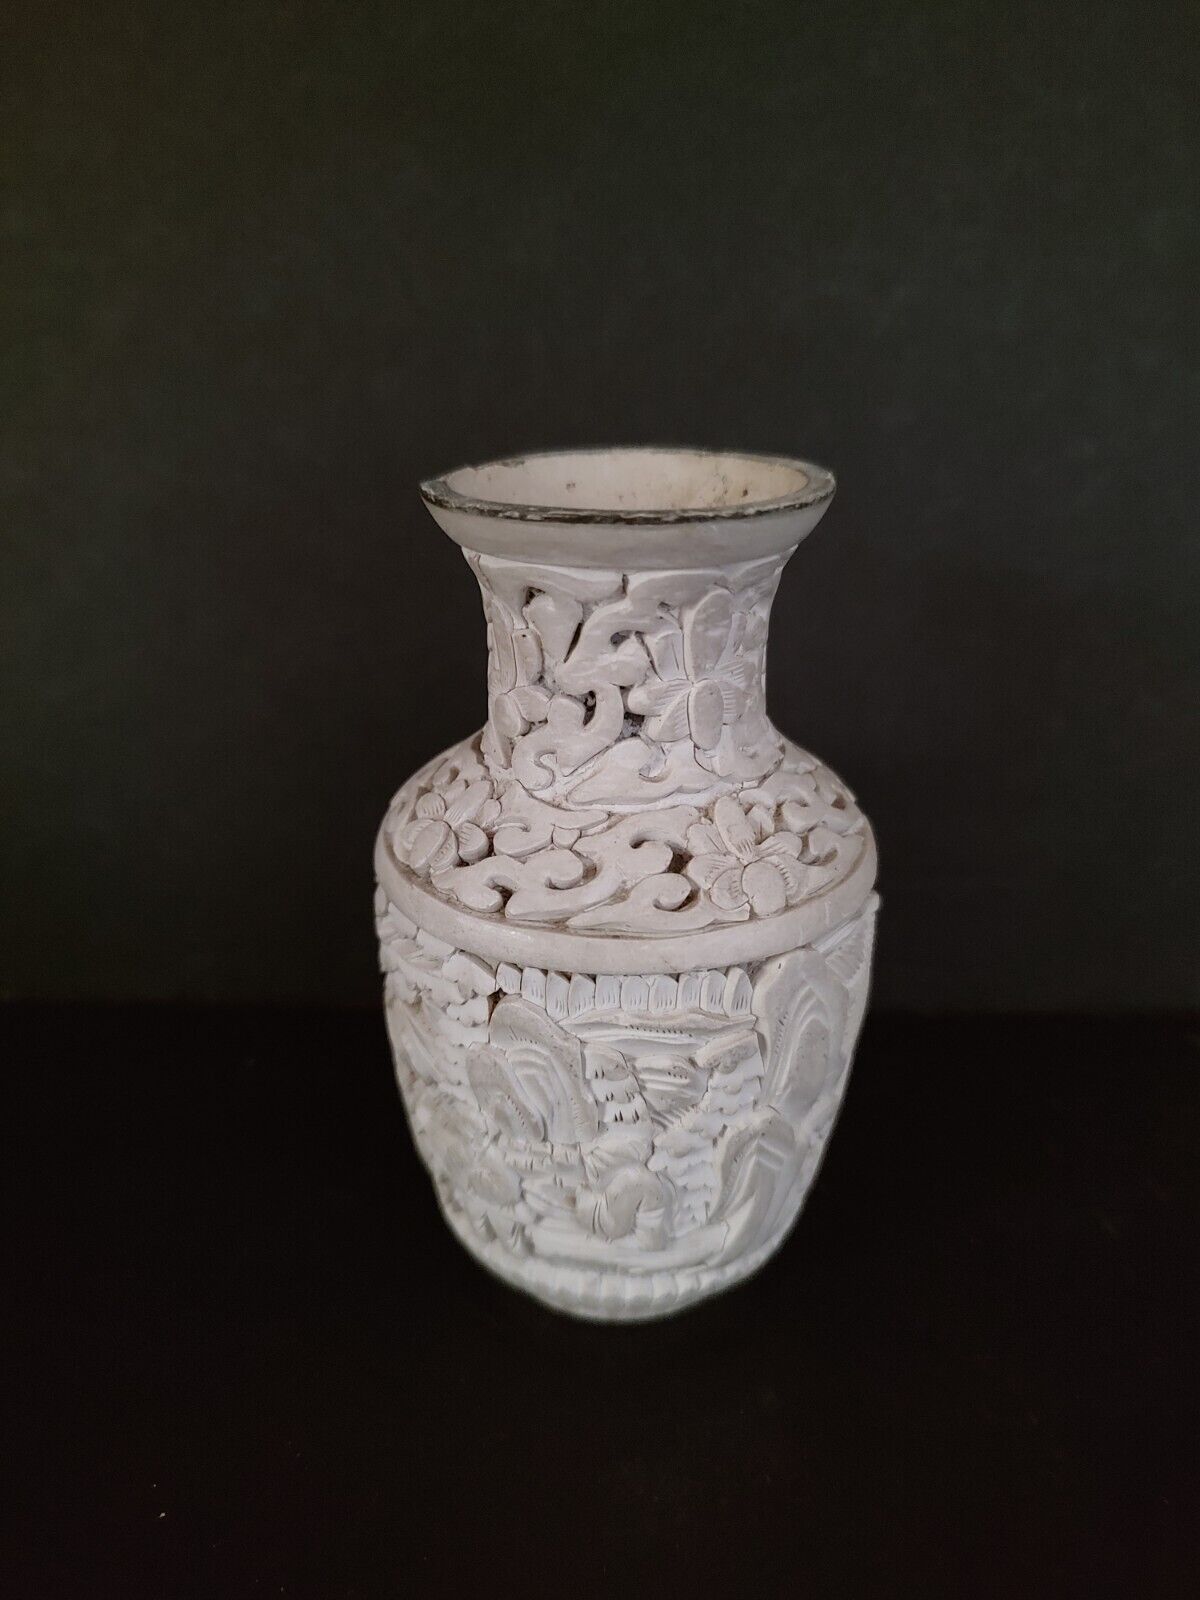 ANTIQUE VINTAGE HANDCARVED ORNATE CHINESE UNKNOWN MATERIAL WHITE VASE OLD